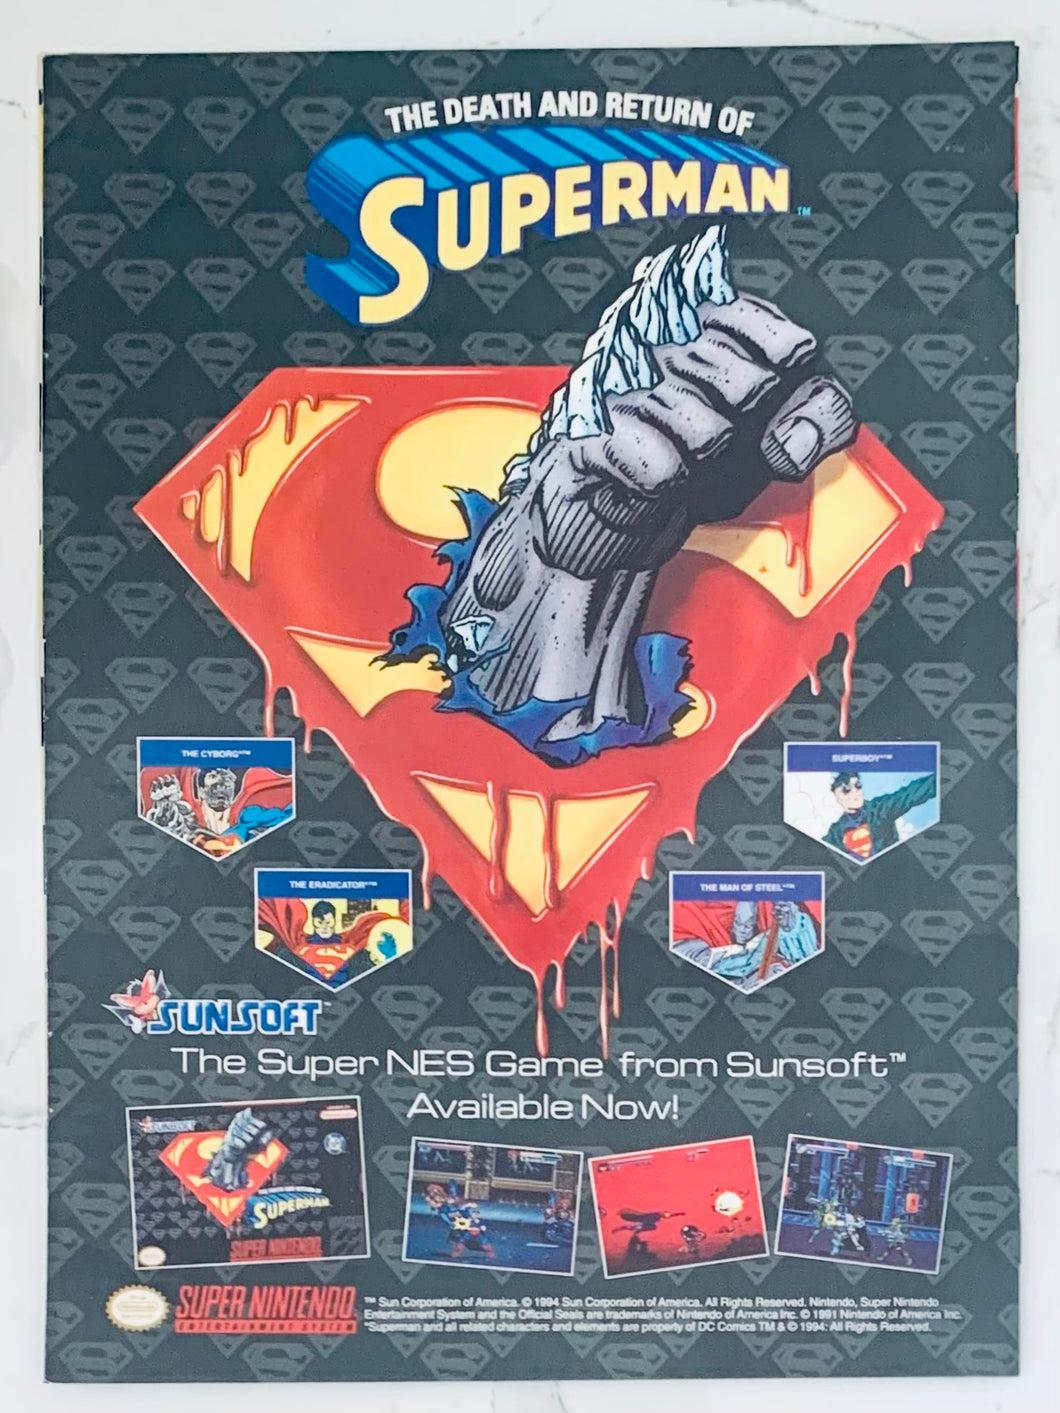 The Death and Return of Superman - SNES - Original Vintage Advertisement - Print Ads - Laminated A4 Poster